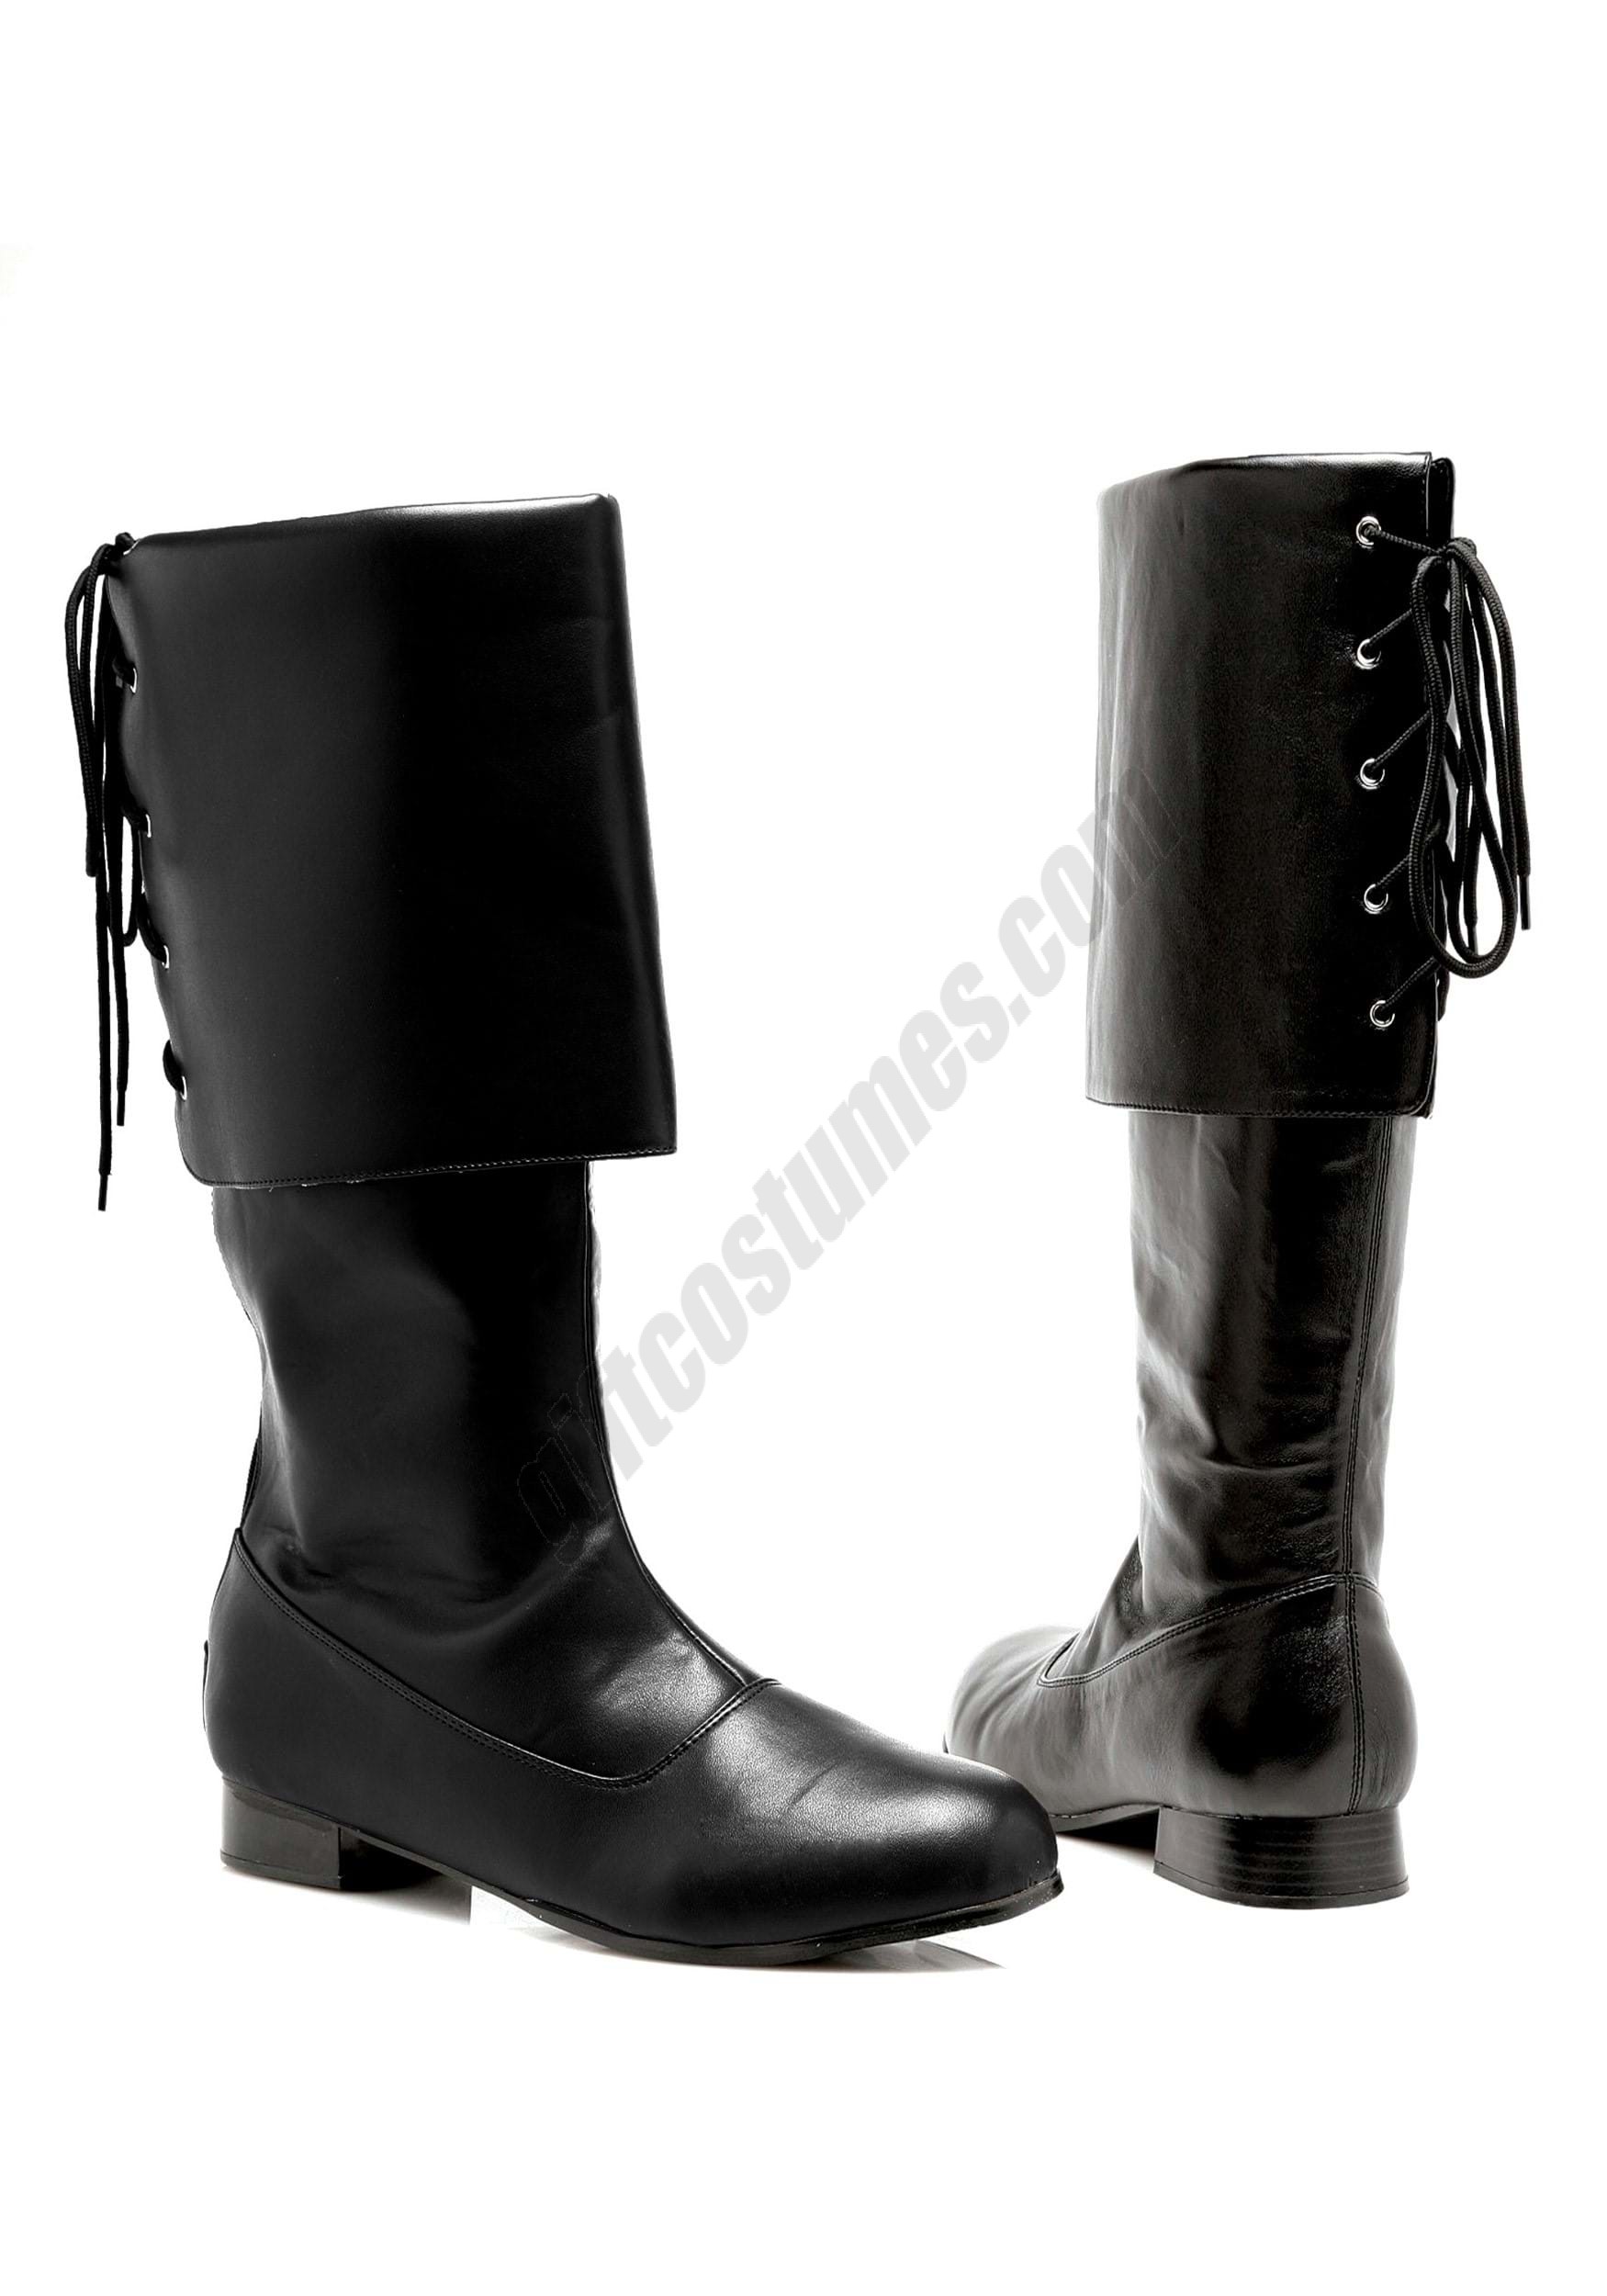 Black Pirate Buckle Boot for Men Promotions - Black Pirate Buckle Boot for Men Promotions